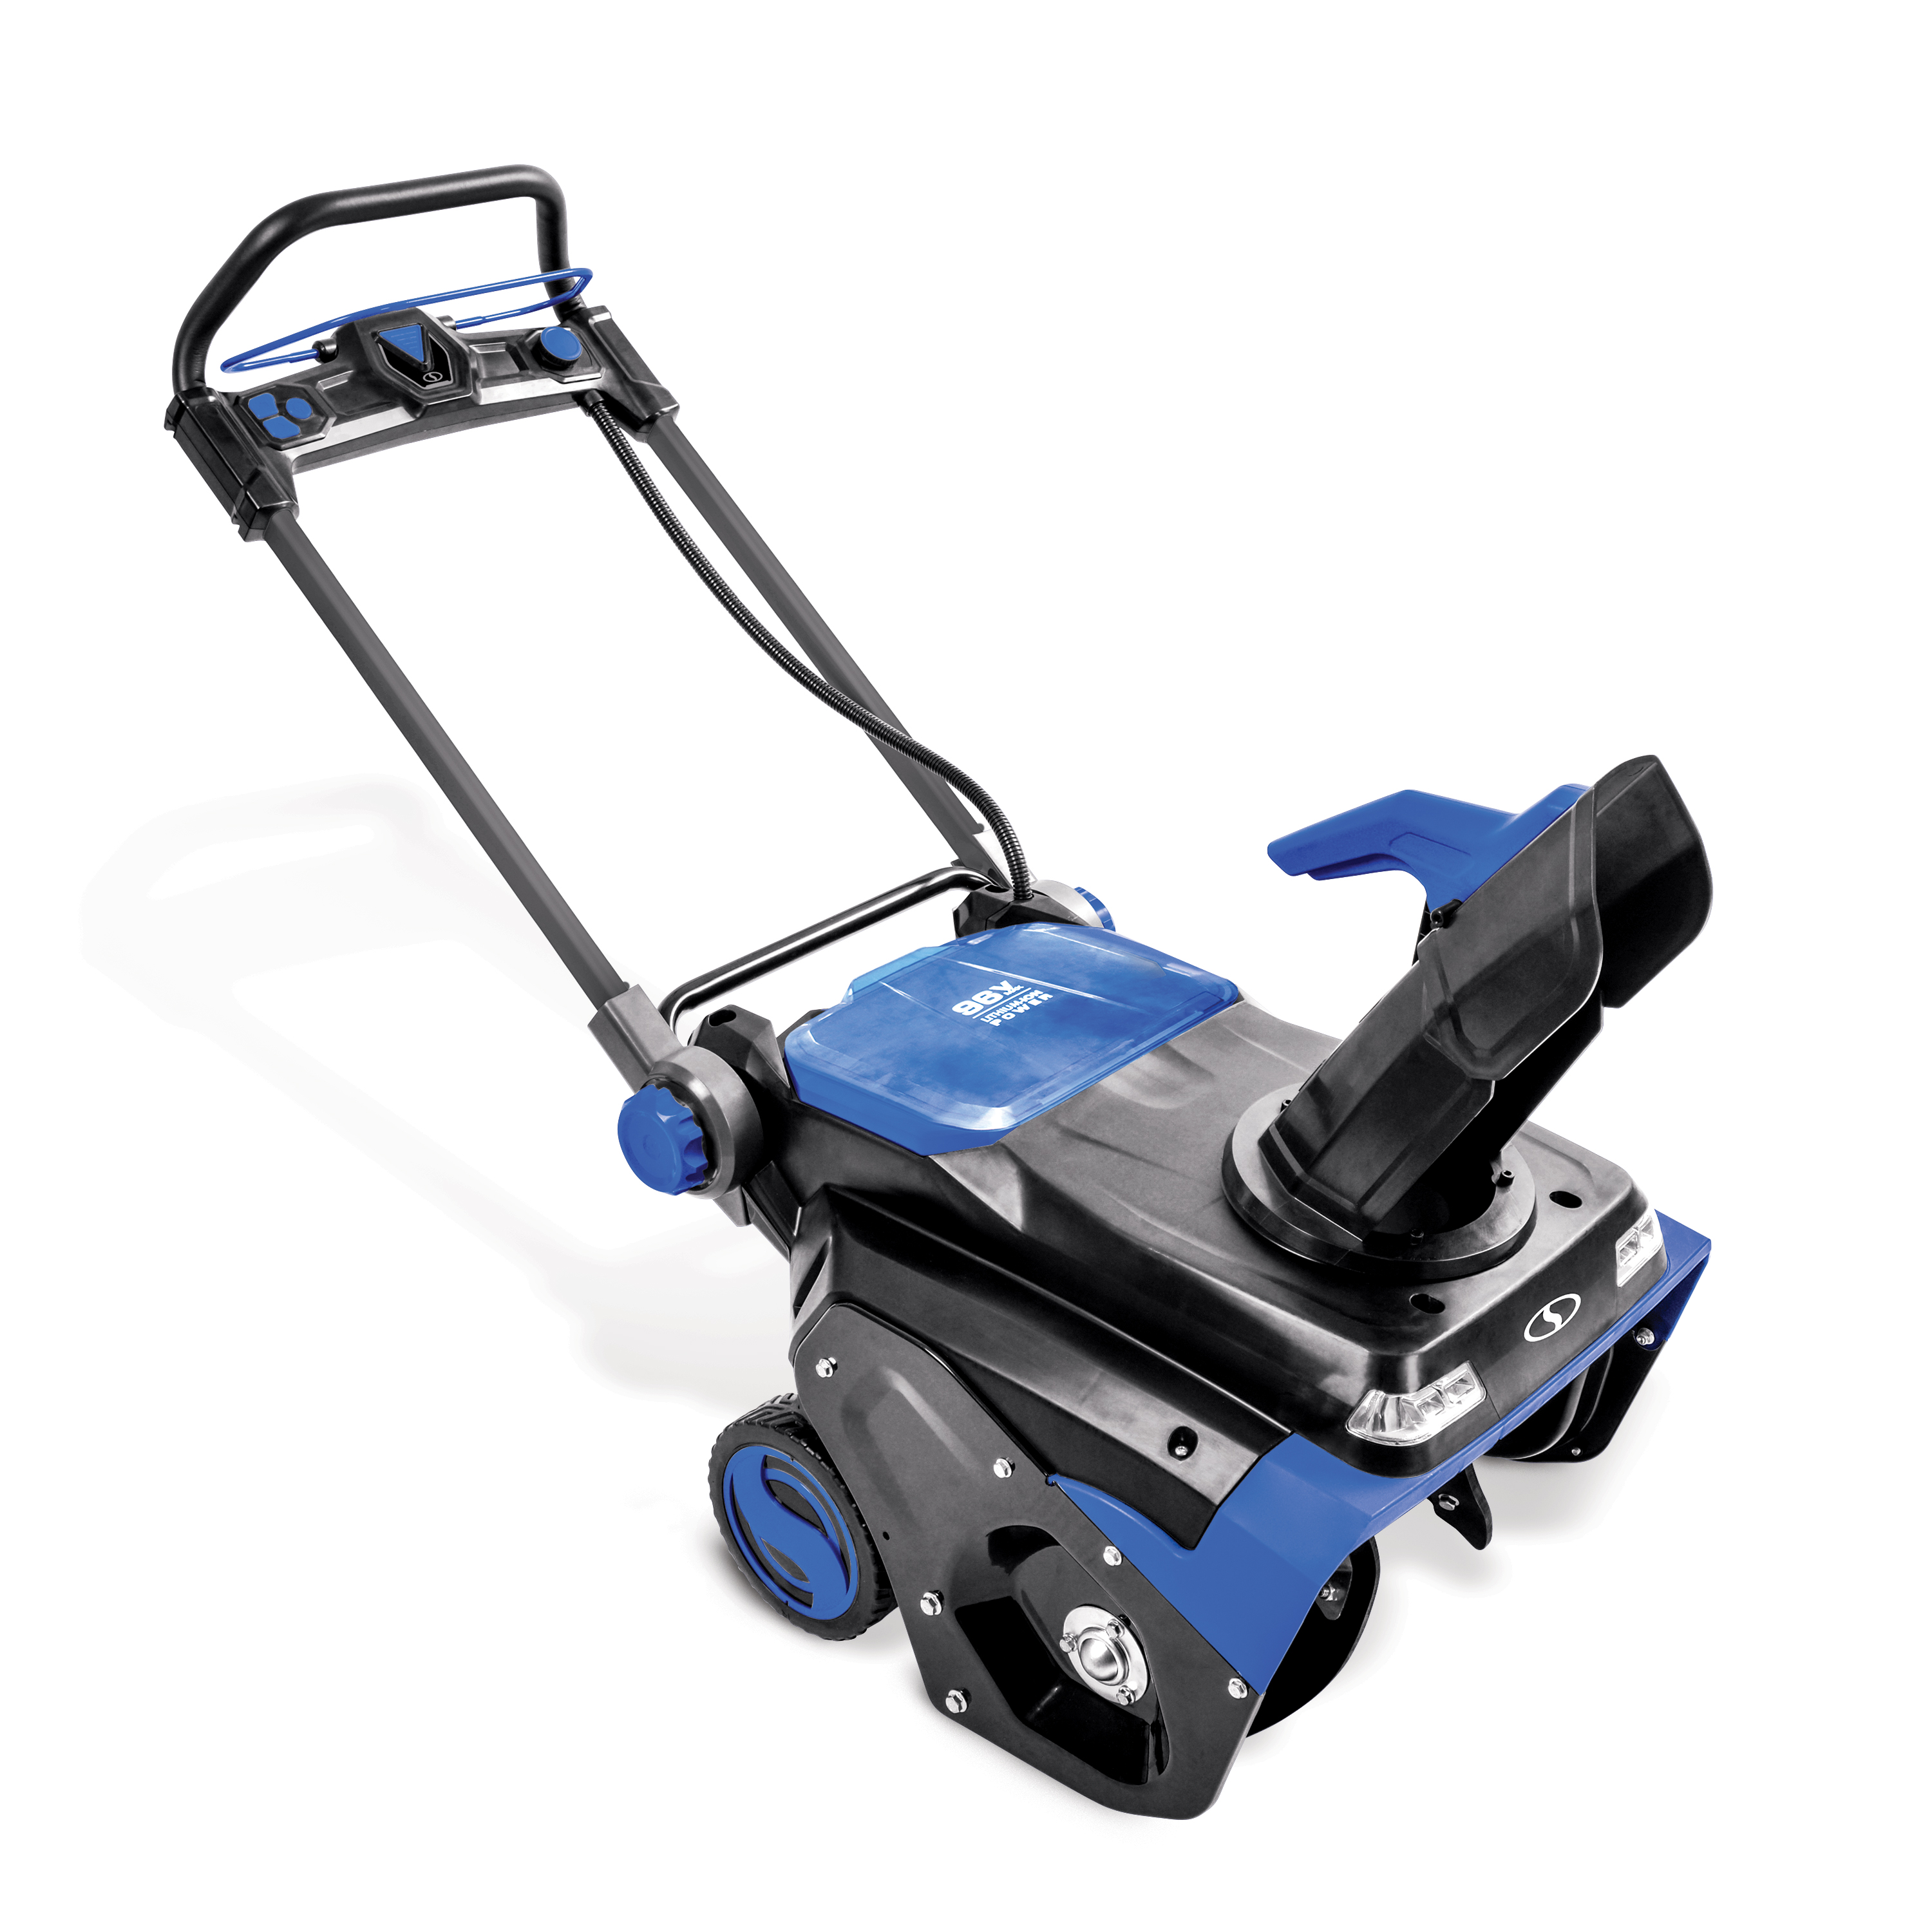 Snow Joe 96V 21-inch Brushless Single-Stage Cordless Snow Blower, 4 x 12.0-Ah Batteries & 2 x Chargers - image 4 of 7